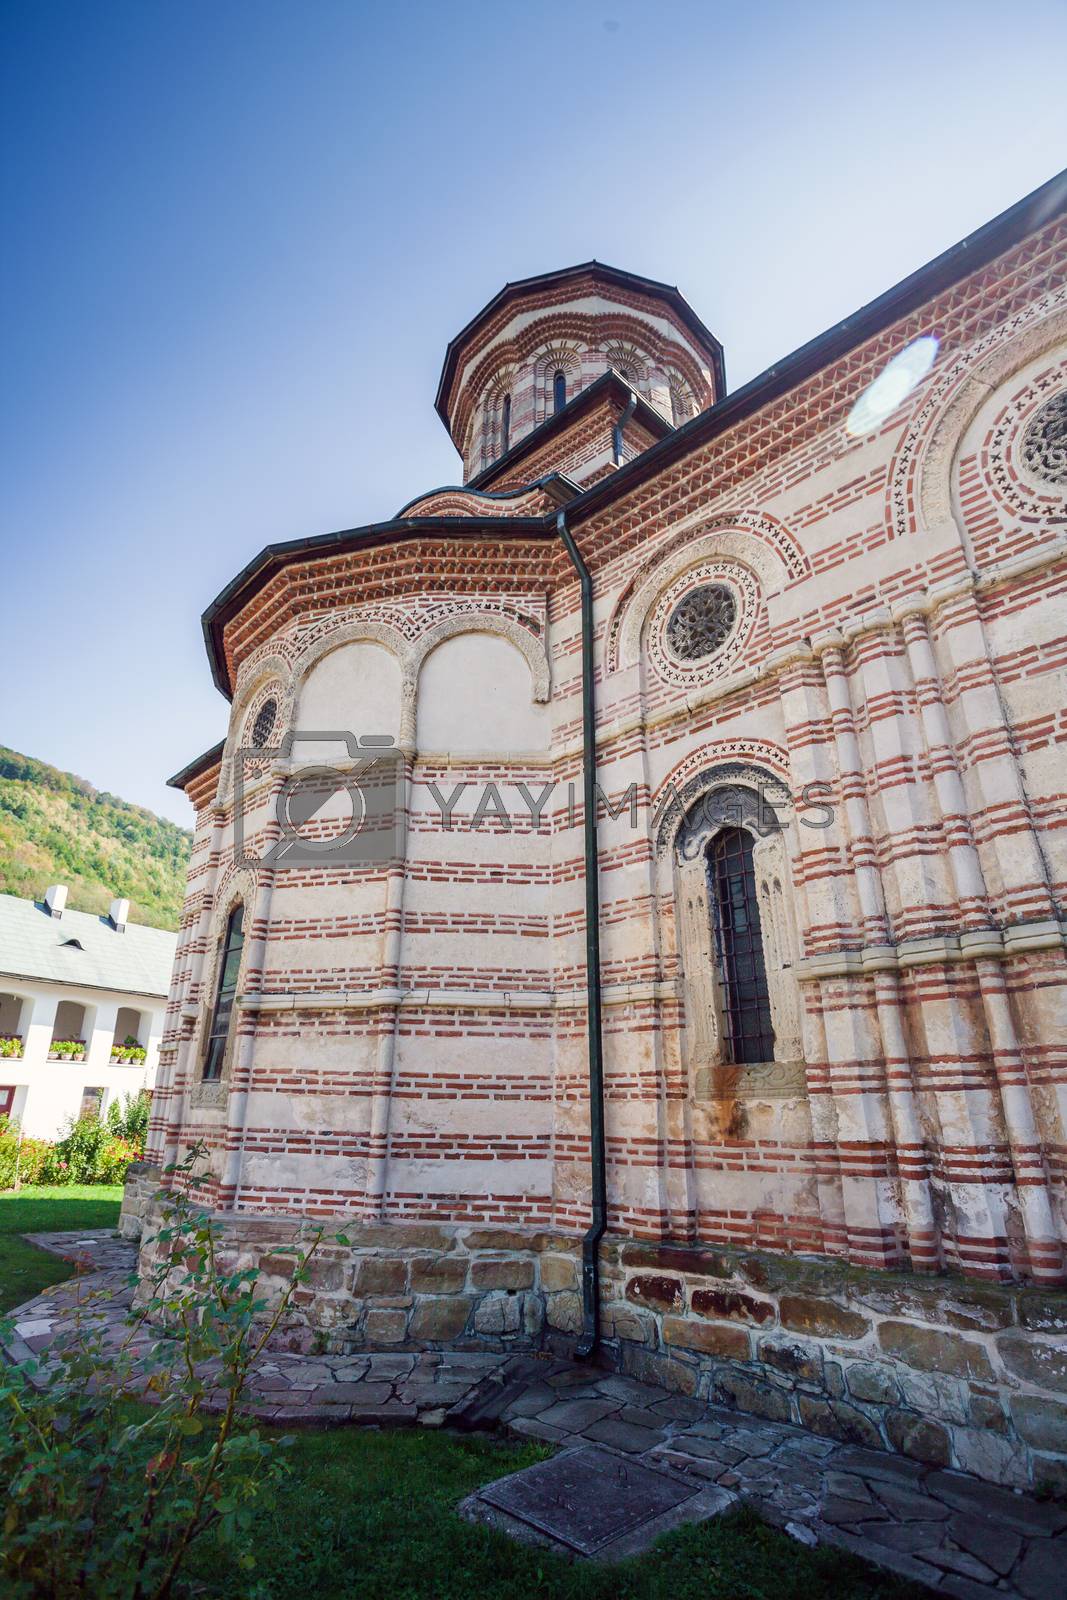 Royalty free image of Cozia monastery church with visiting tourists by PixAchi